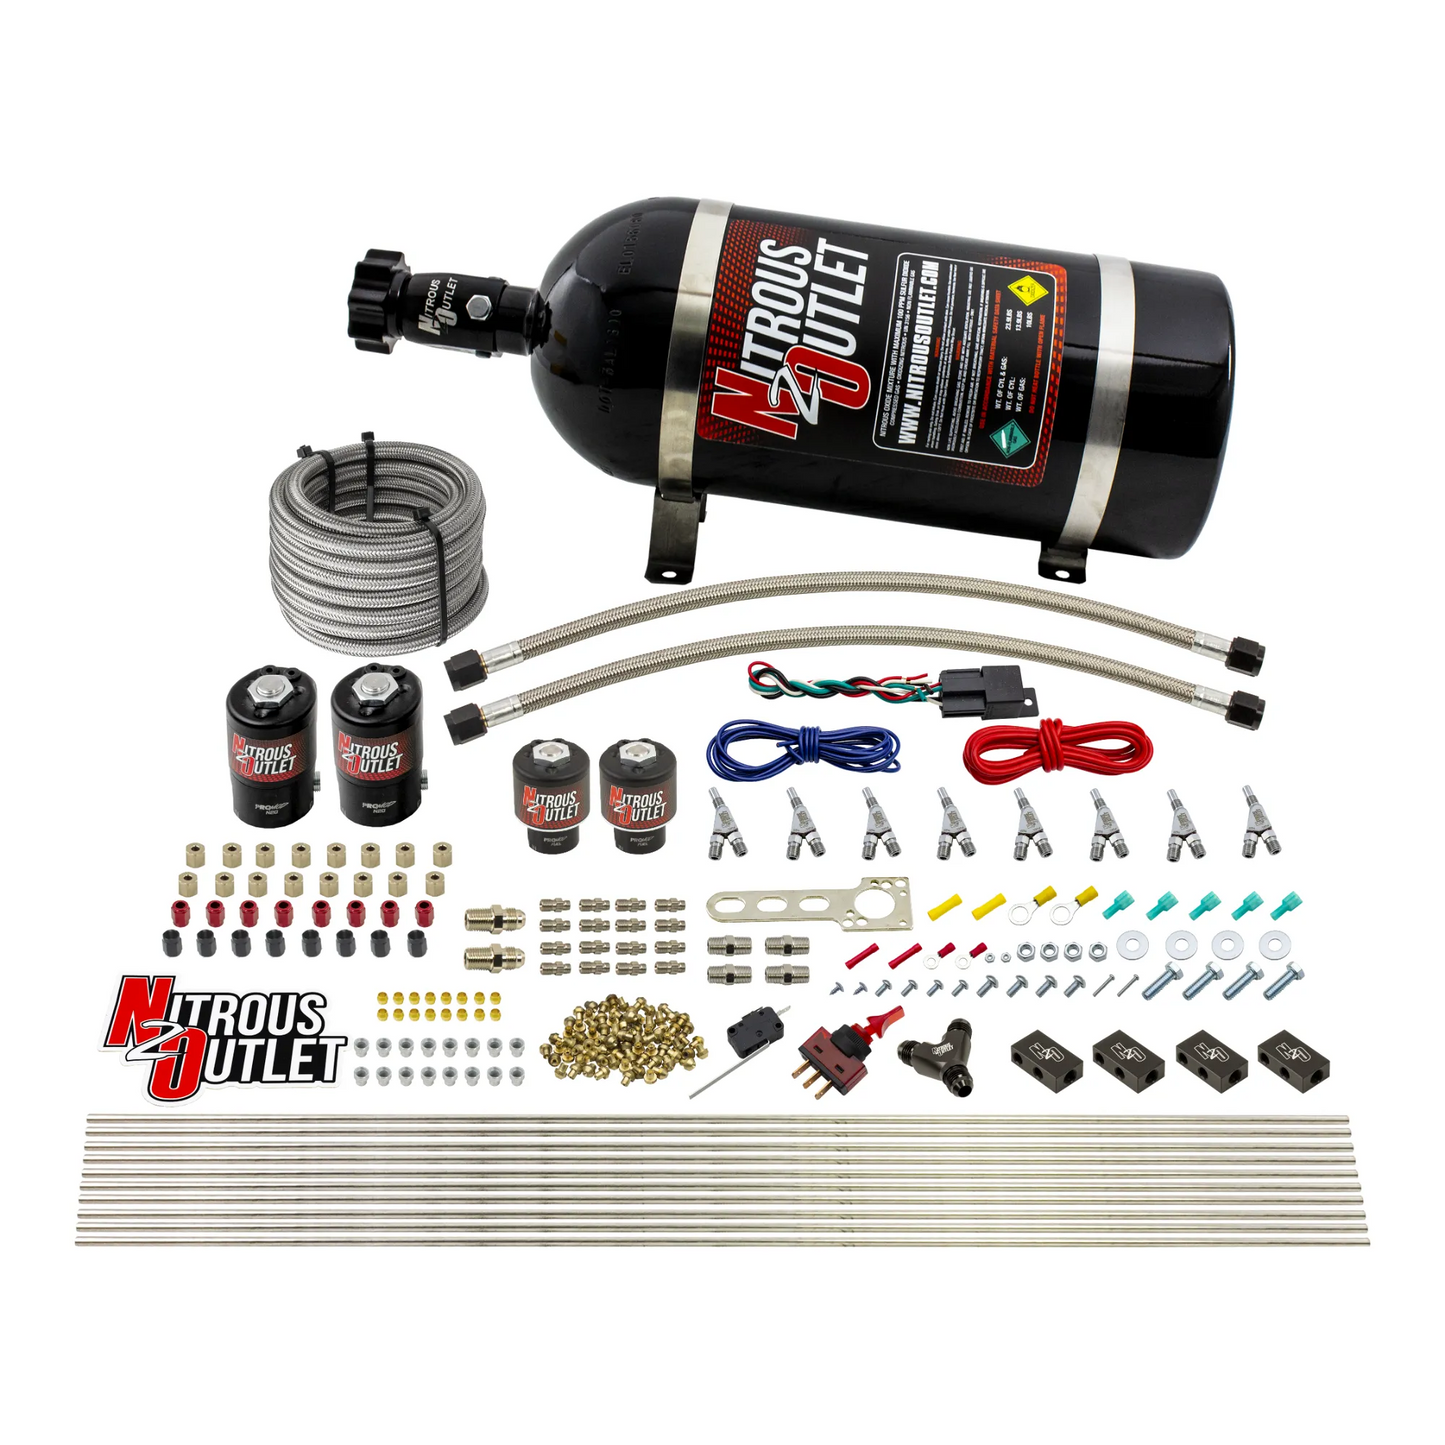 8 Cylinder Single Stage Direct Port Nitrous System - .112 Nitrous/.177 Fuel Solenoids - Alcohol - Straight Blow Through Nozzles